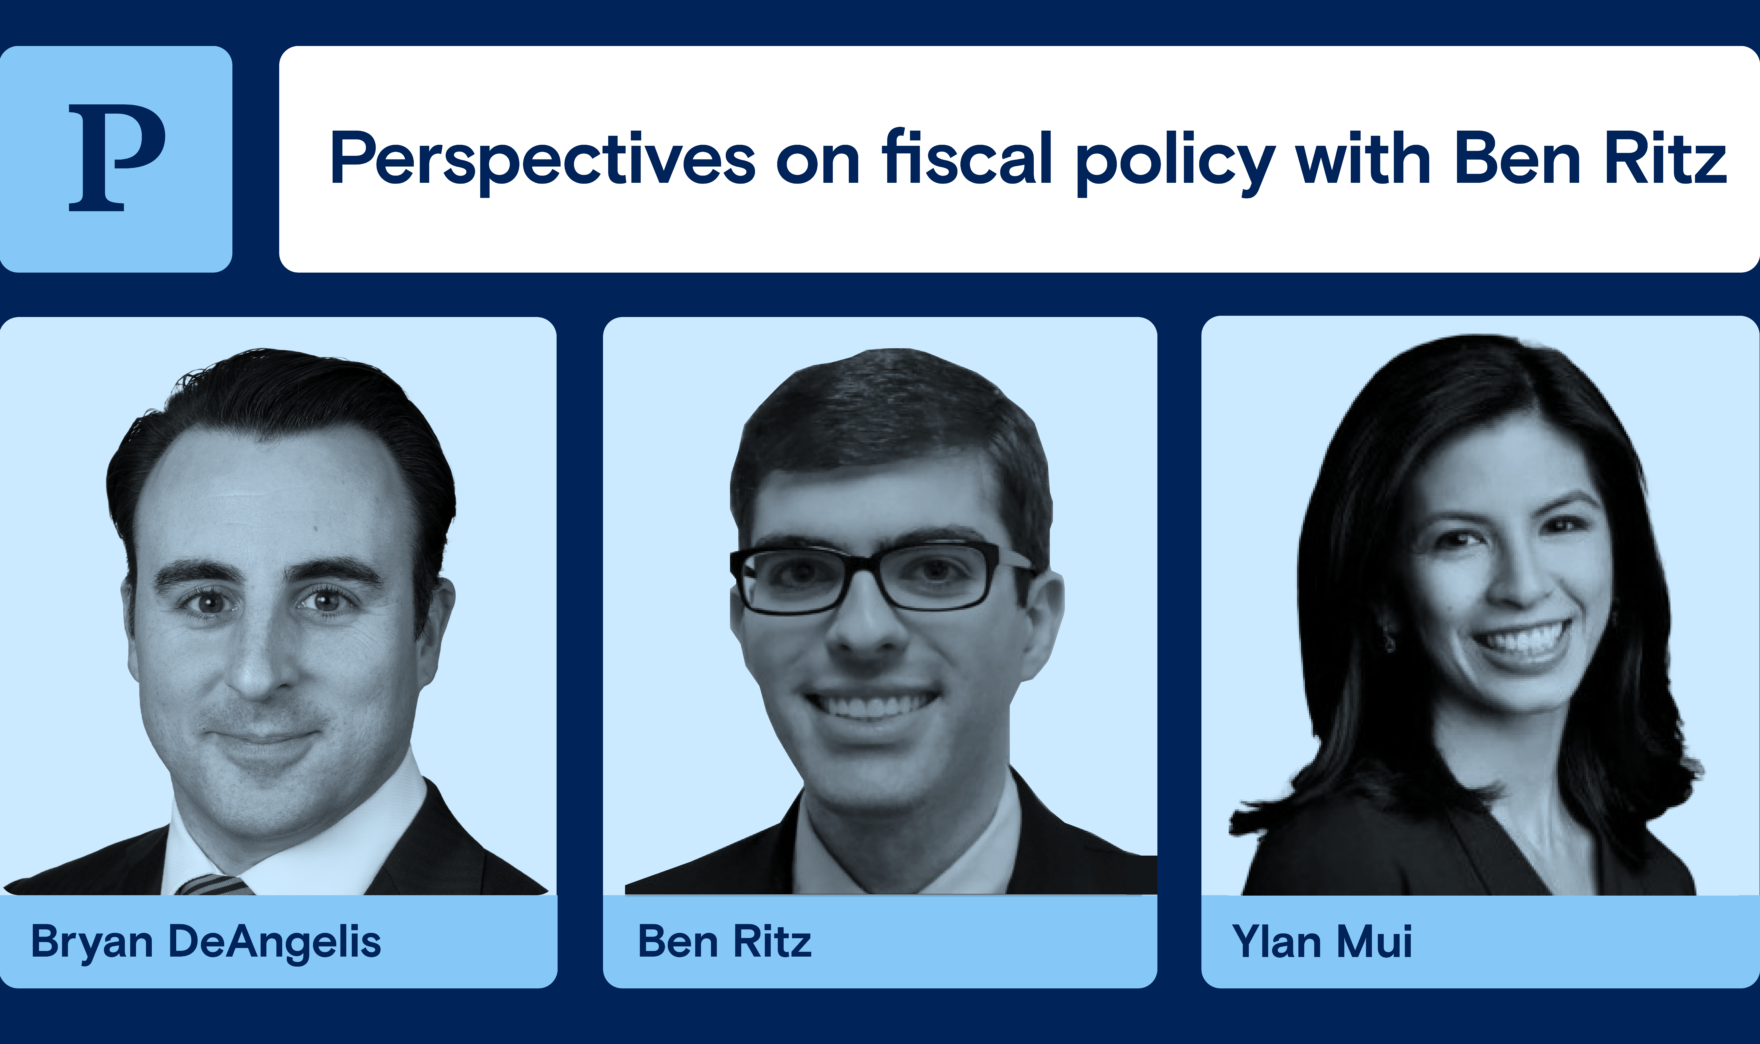 Perspectives on fiscal policy with Ben Ritz